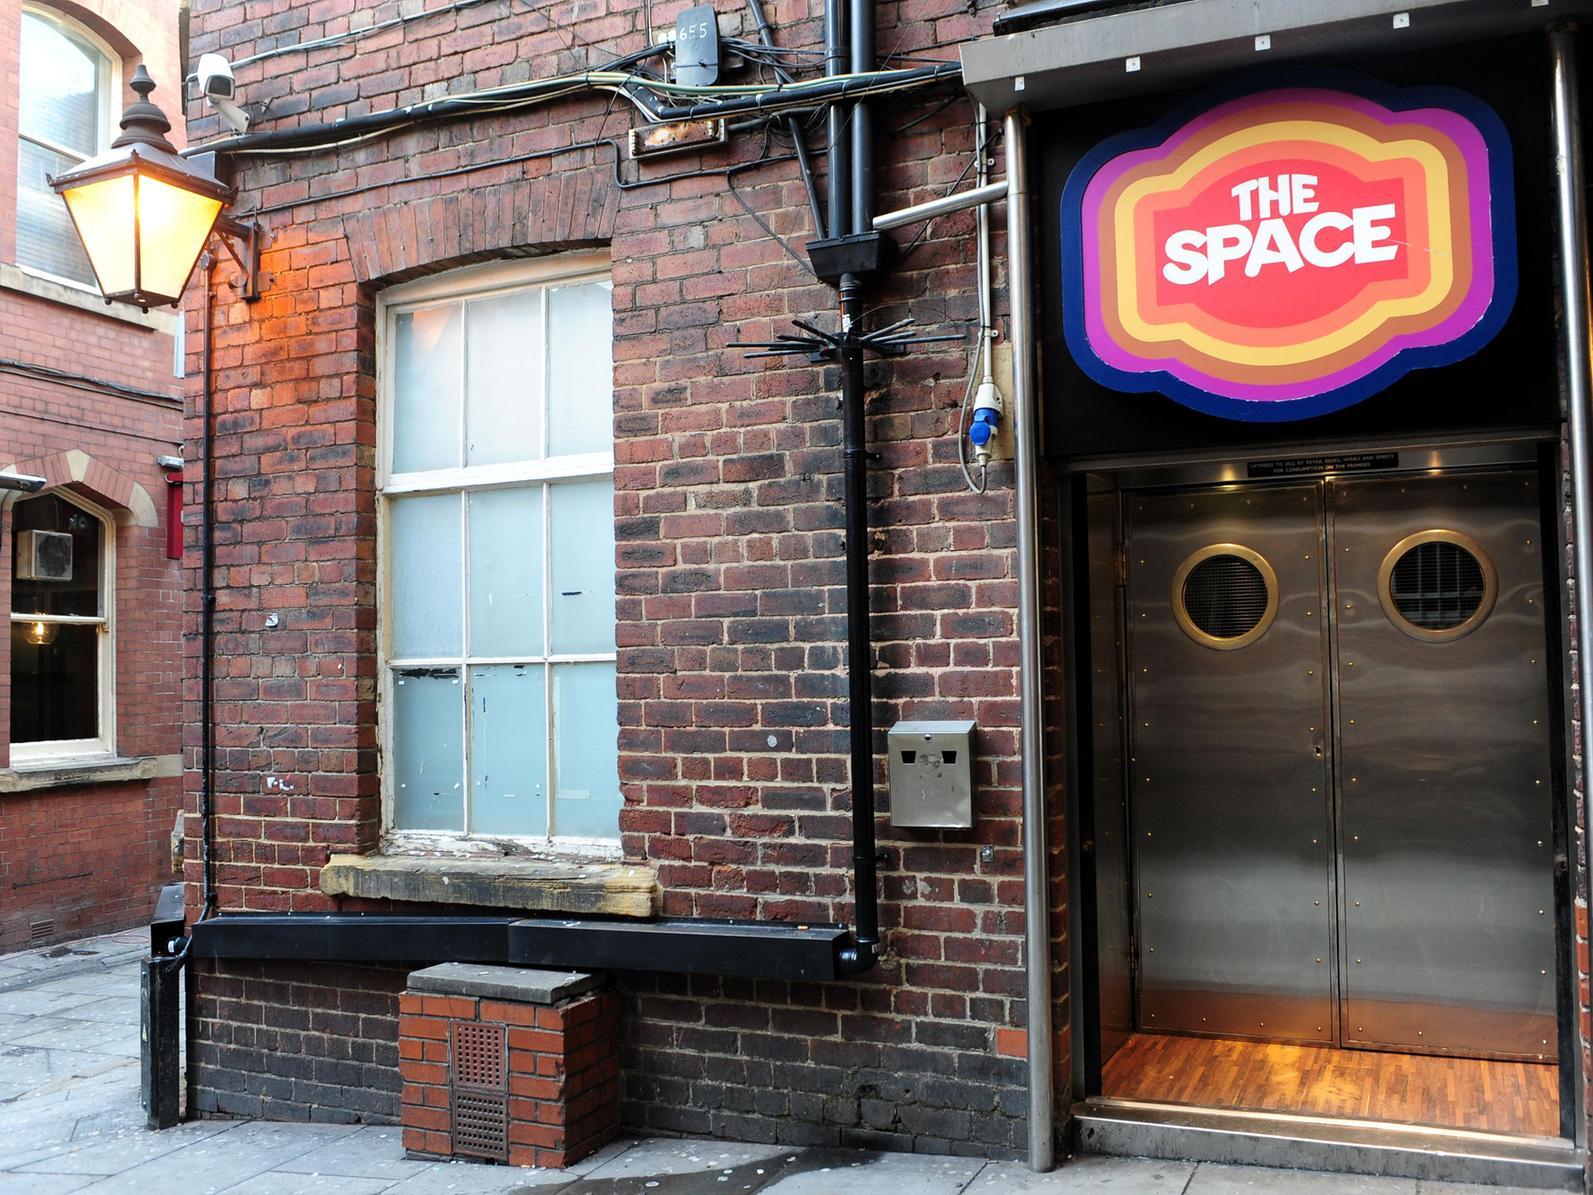 23 crimes were recorded at The Space club on Hirst's Yard in the nine month period. A spokesperson for The Space was contacted for comment.